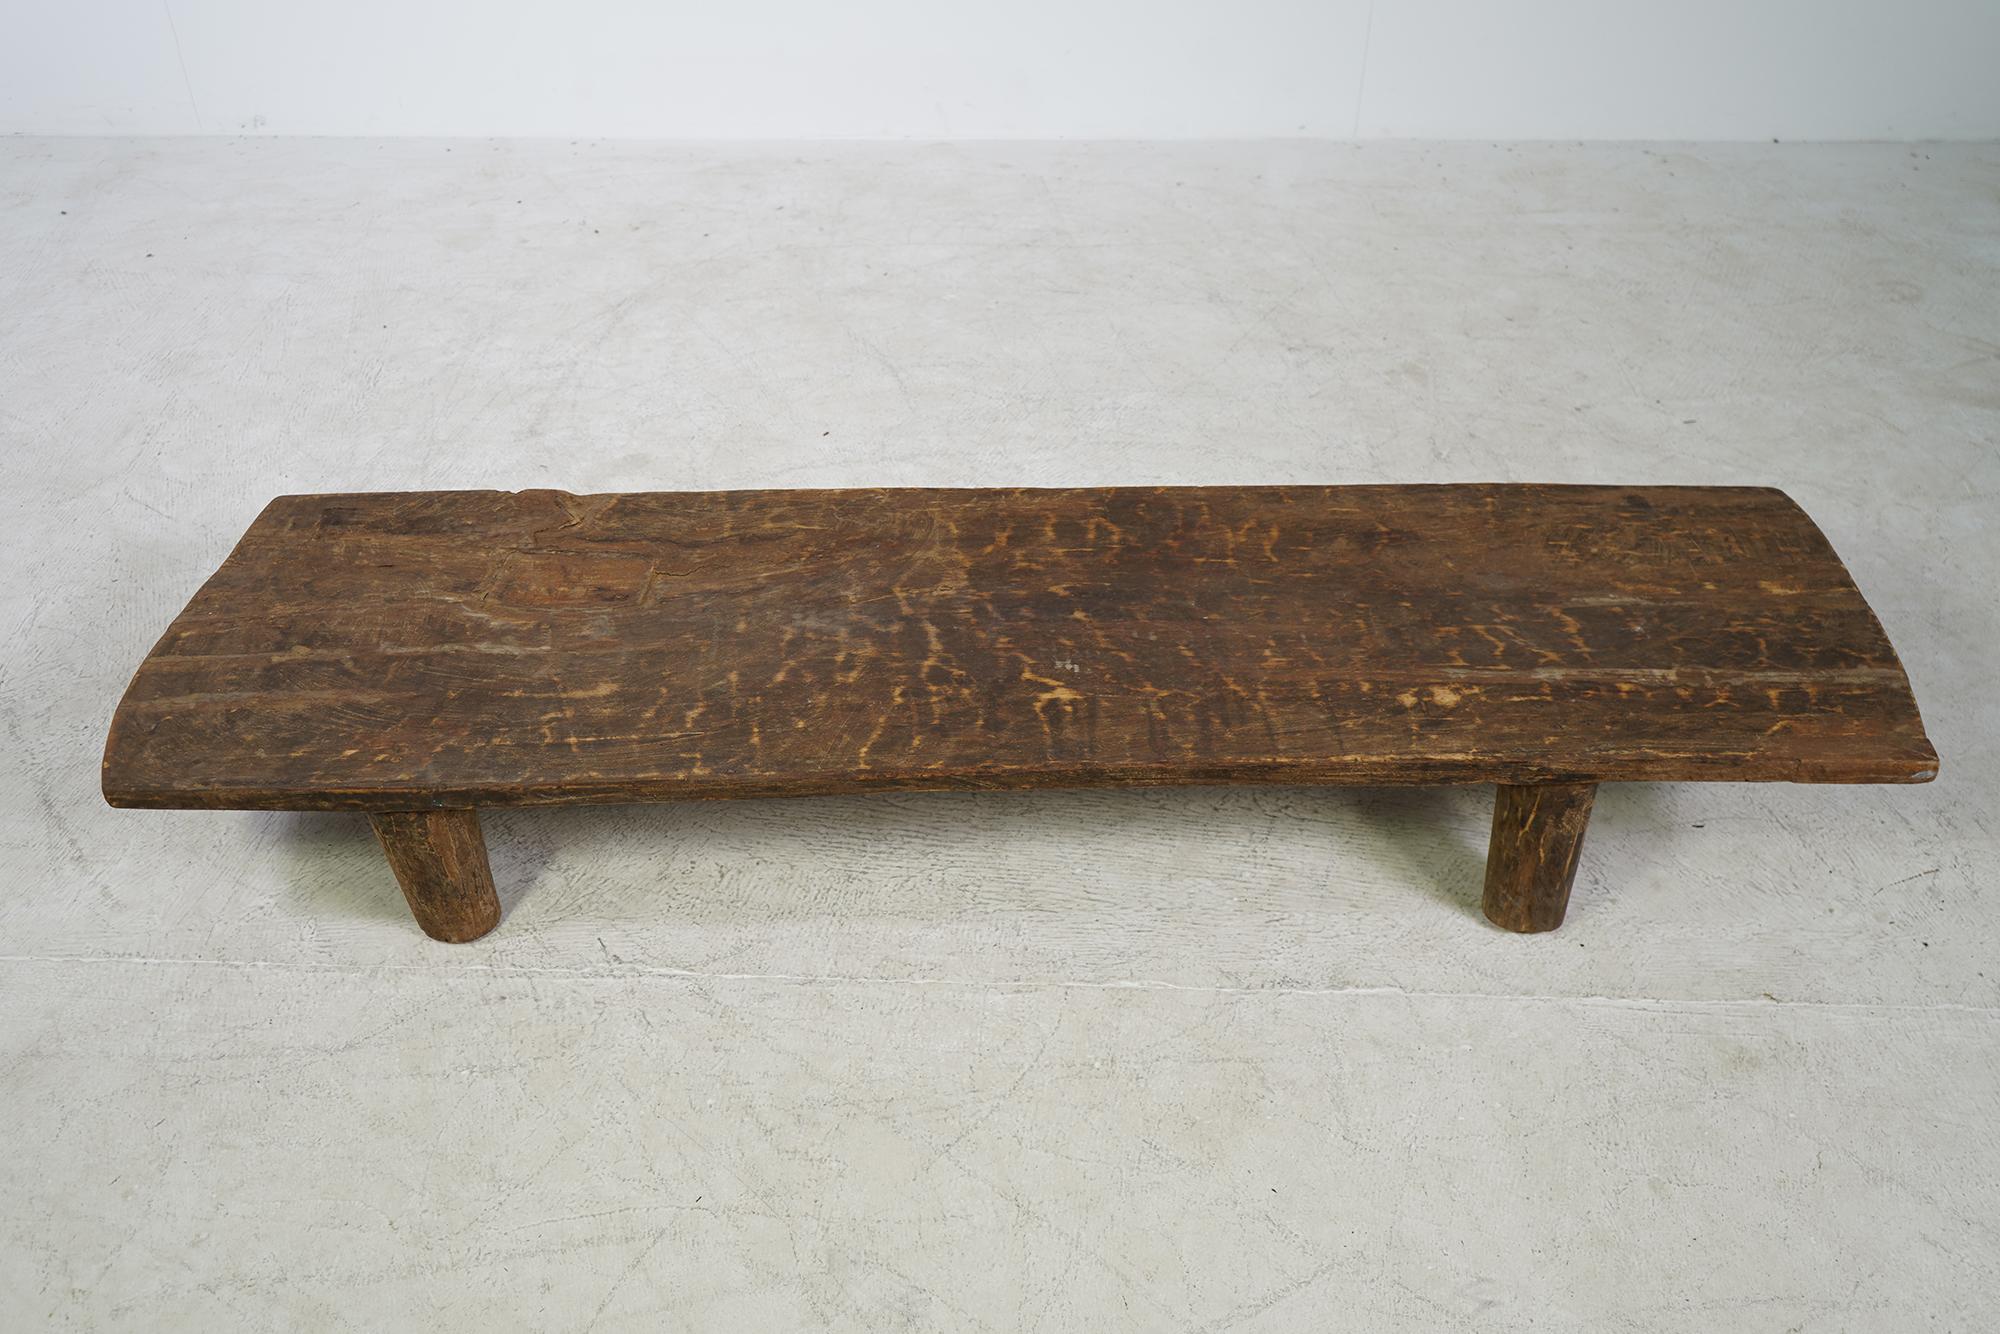 Indian Rustic Naga Table or Bench, Hand Carved Wabi Sabi Style, Ancient Wood 'A' For Sale